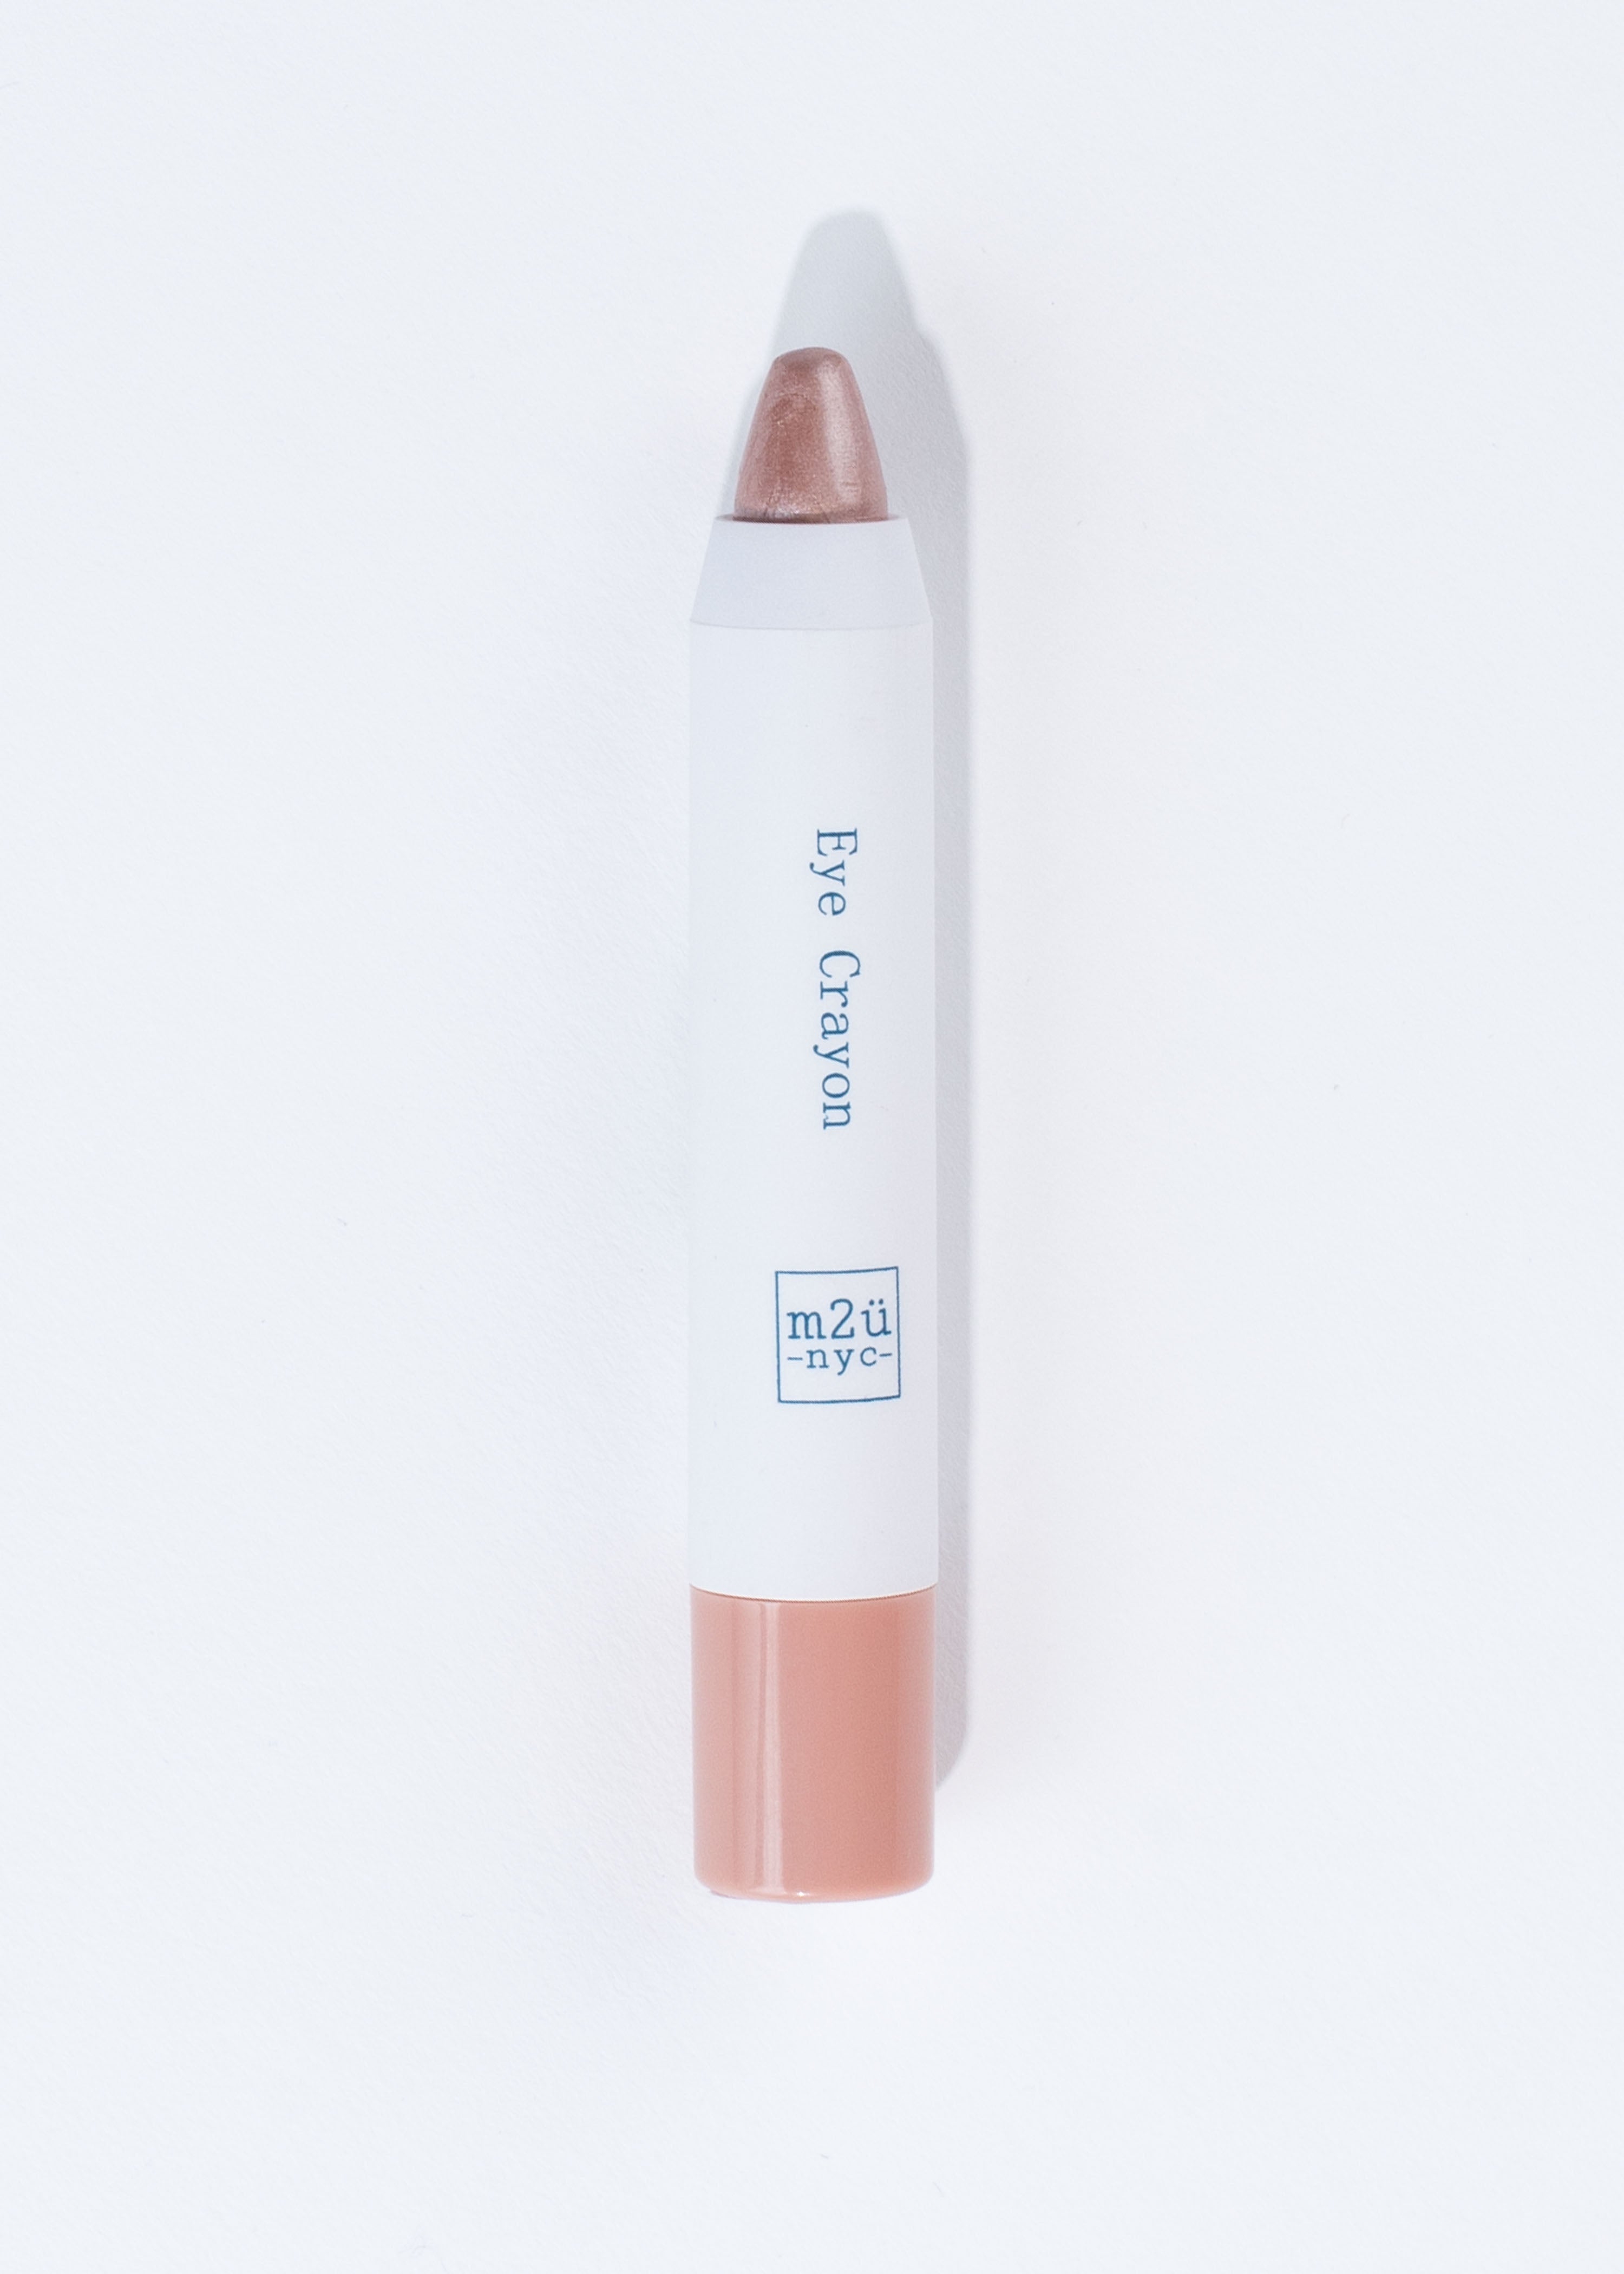 pencil-like eyeshadow crayon in shade passionate pink